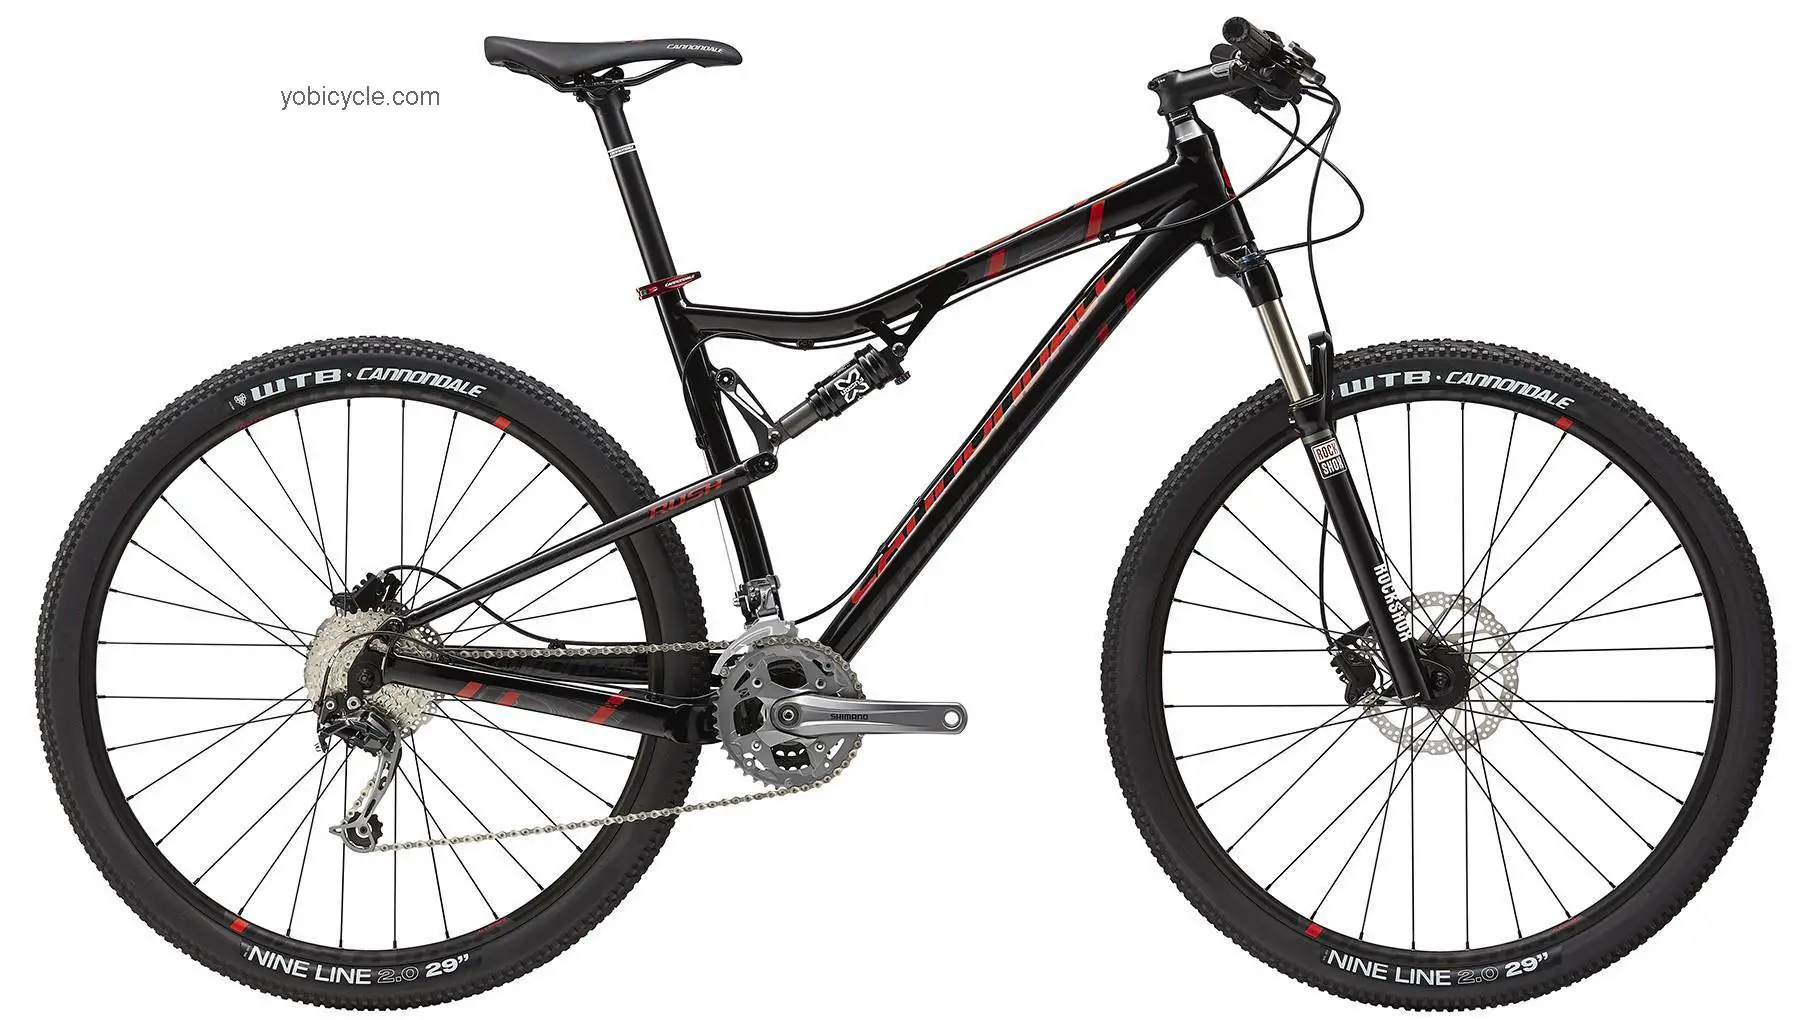 Cannondale RUSH 29 3 2015 comparison online with competitors